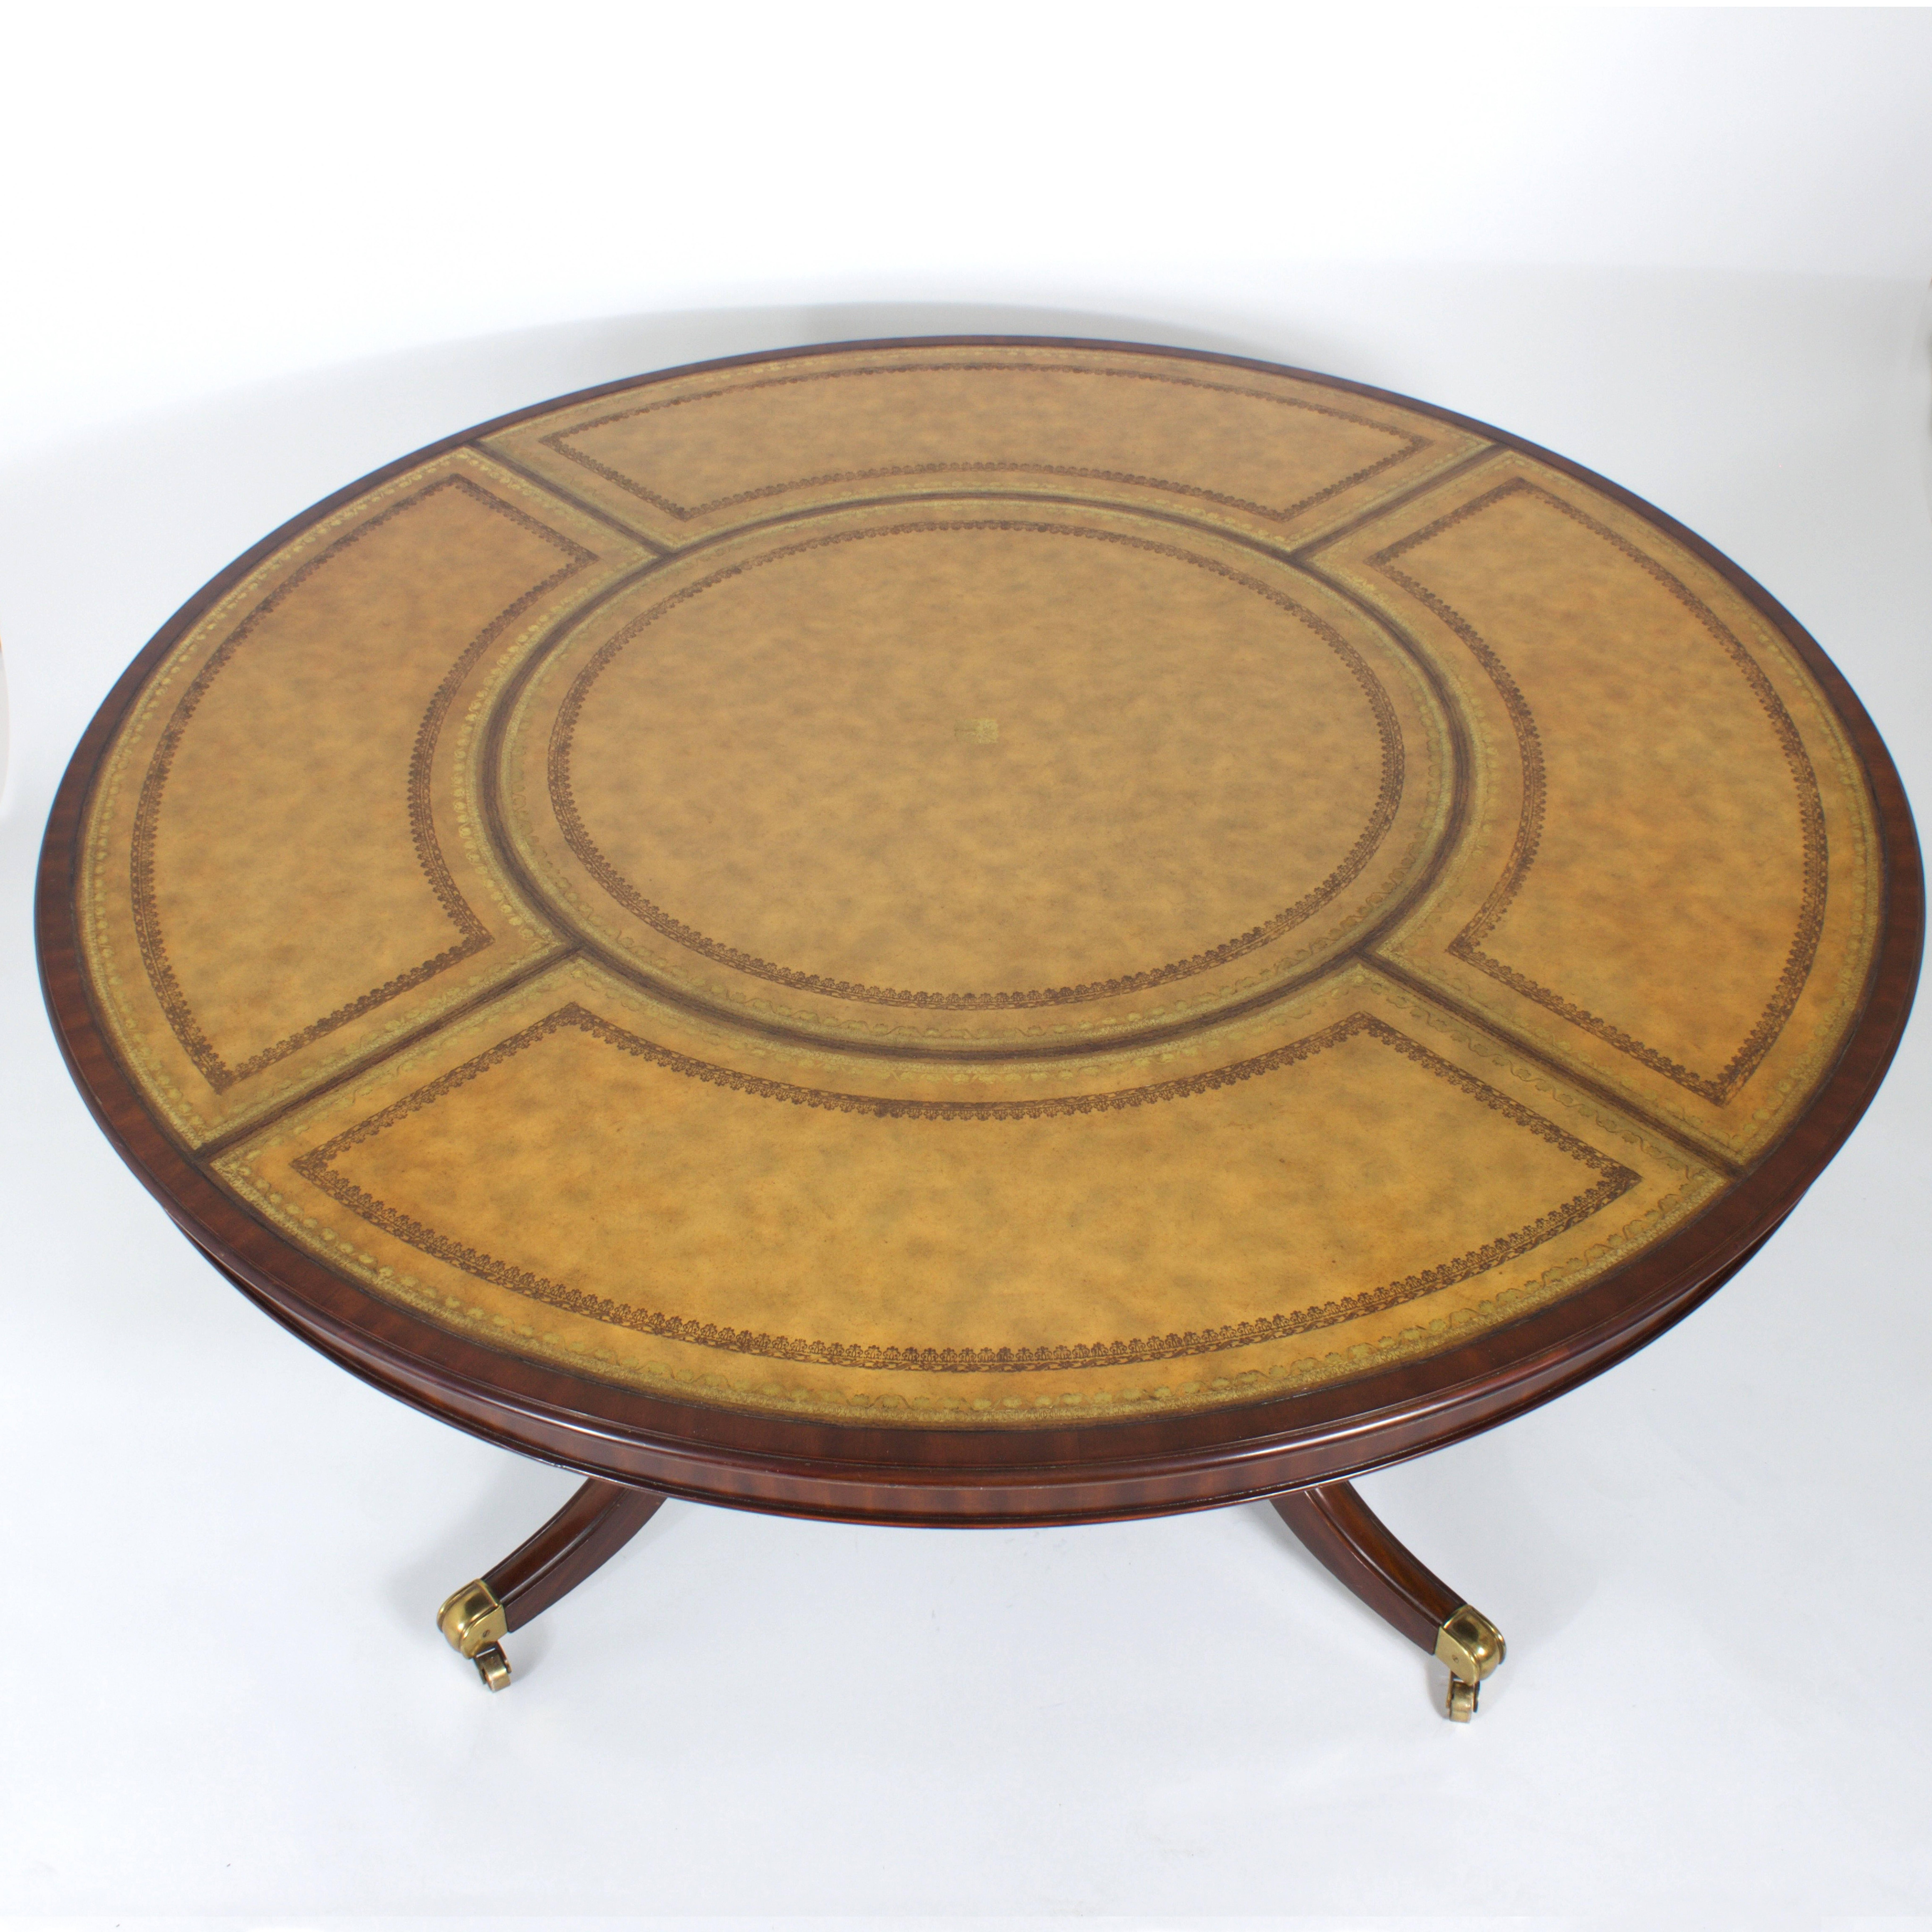 Round Leather Top Dining Or Library, Round Mahogany Table With Leather Top